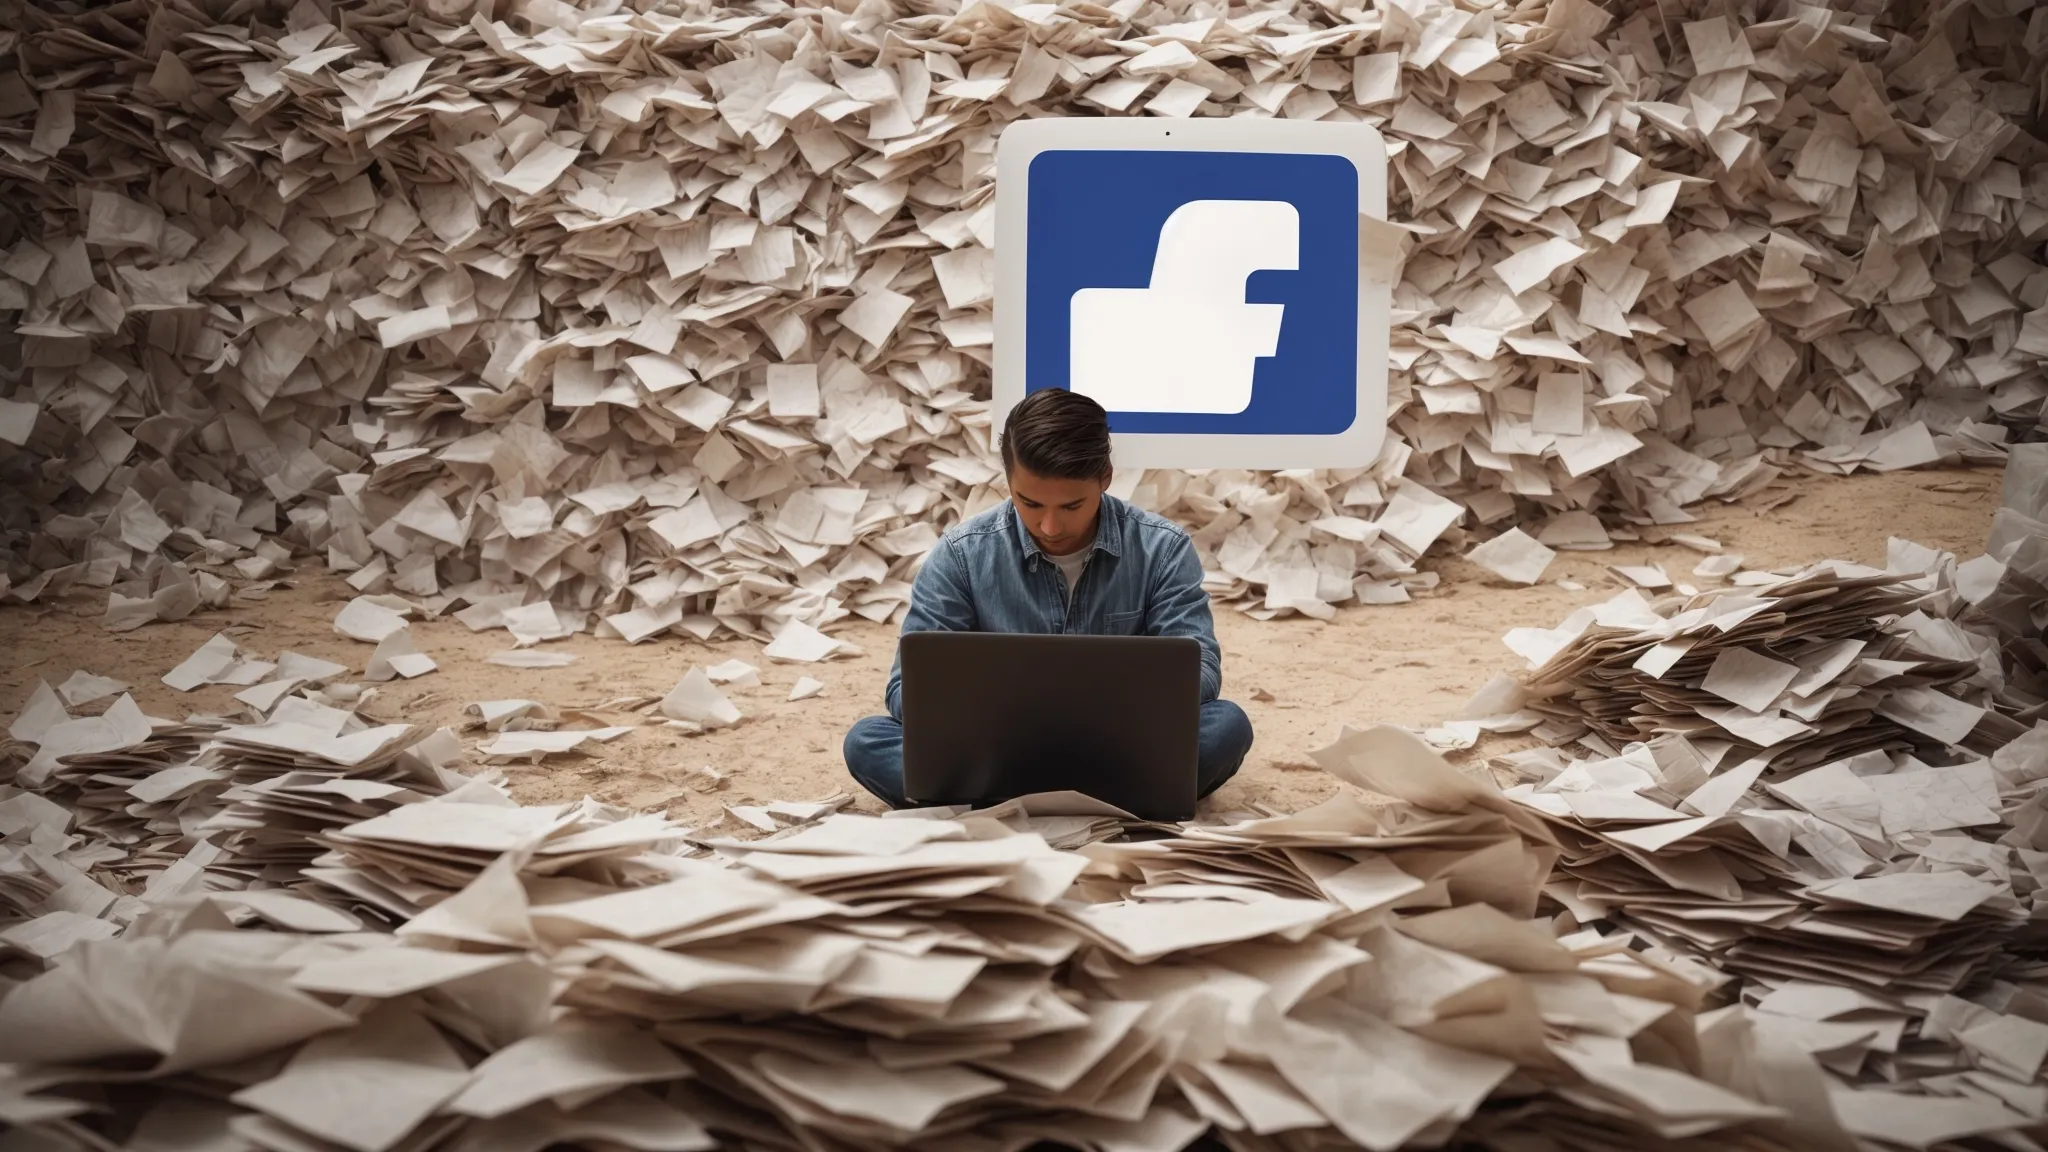 a person frustratedly closes their laptop amid a pile of scattered papers with the facebook logo on the screen.